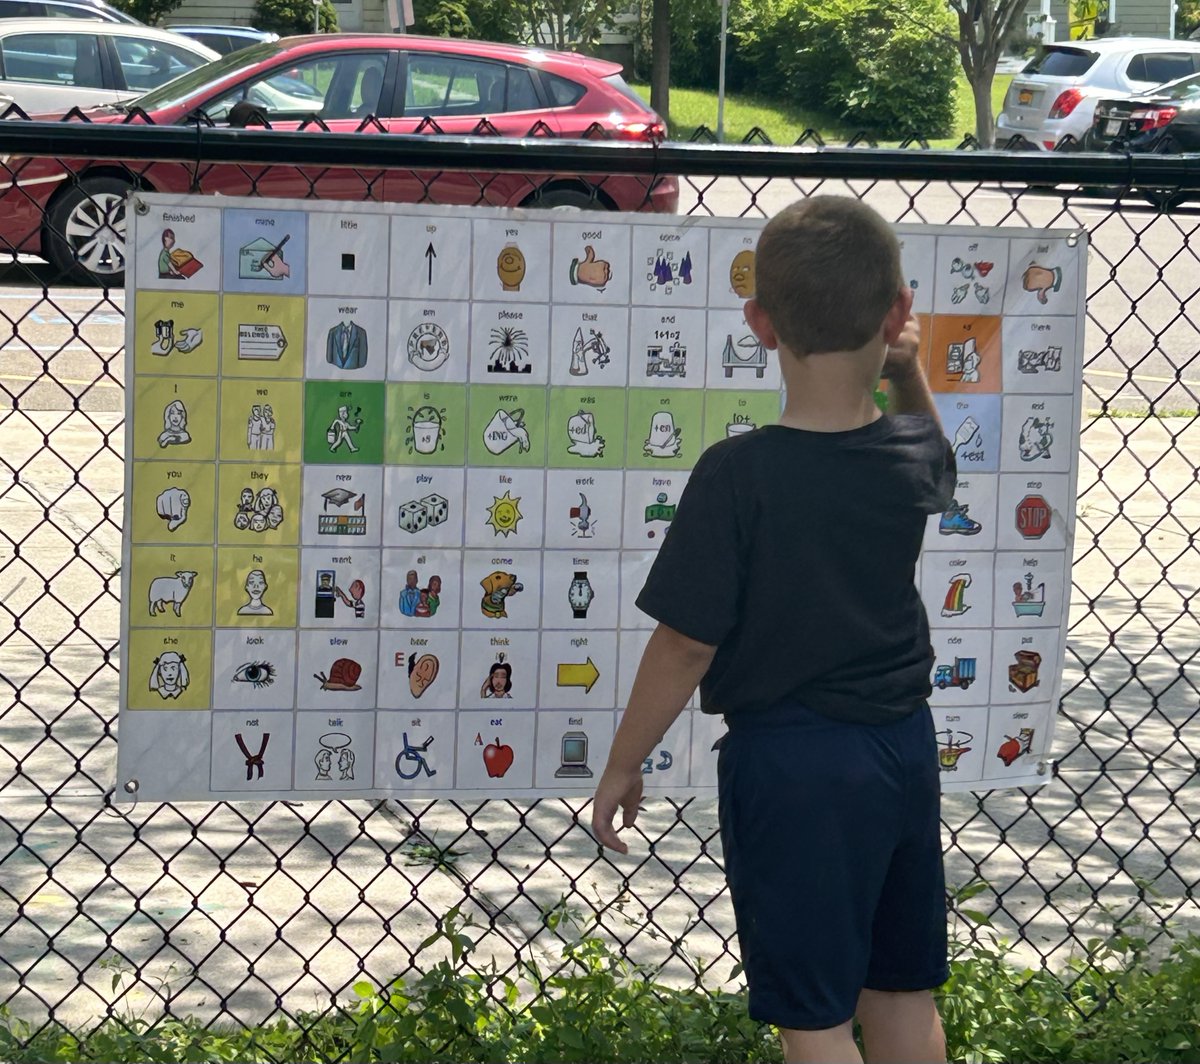 @ICSDPreK Summer students discovering the new communication board on the playground. Thank you @FallCreekES @SarahGregorySLP for creating such an inclusive school community ...encouraging communication and connection for all children! #inclusion #icsdprek #teamicsd